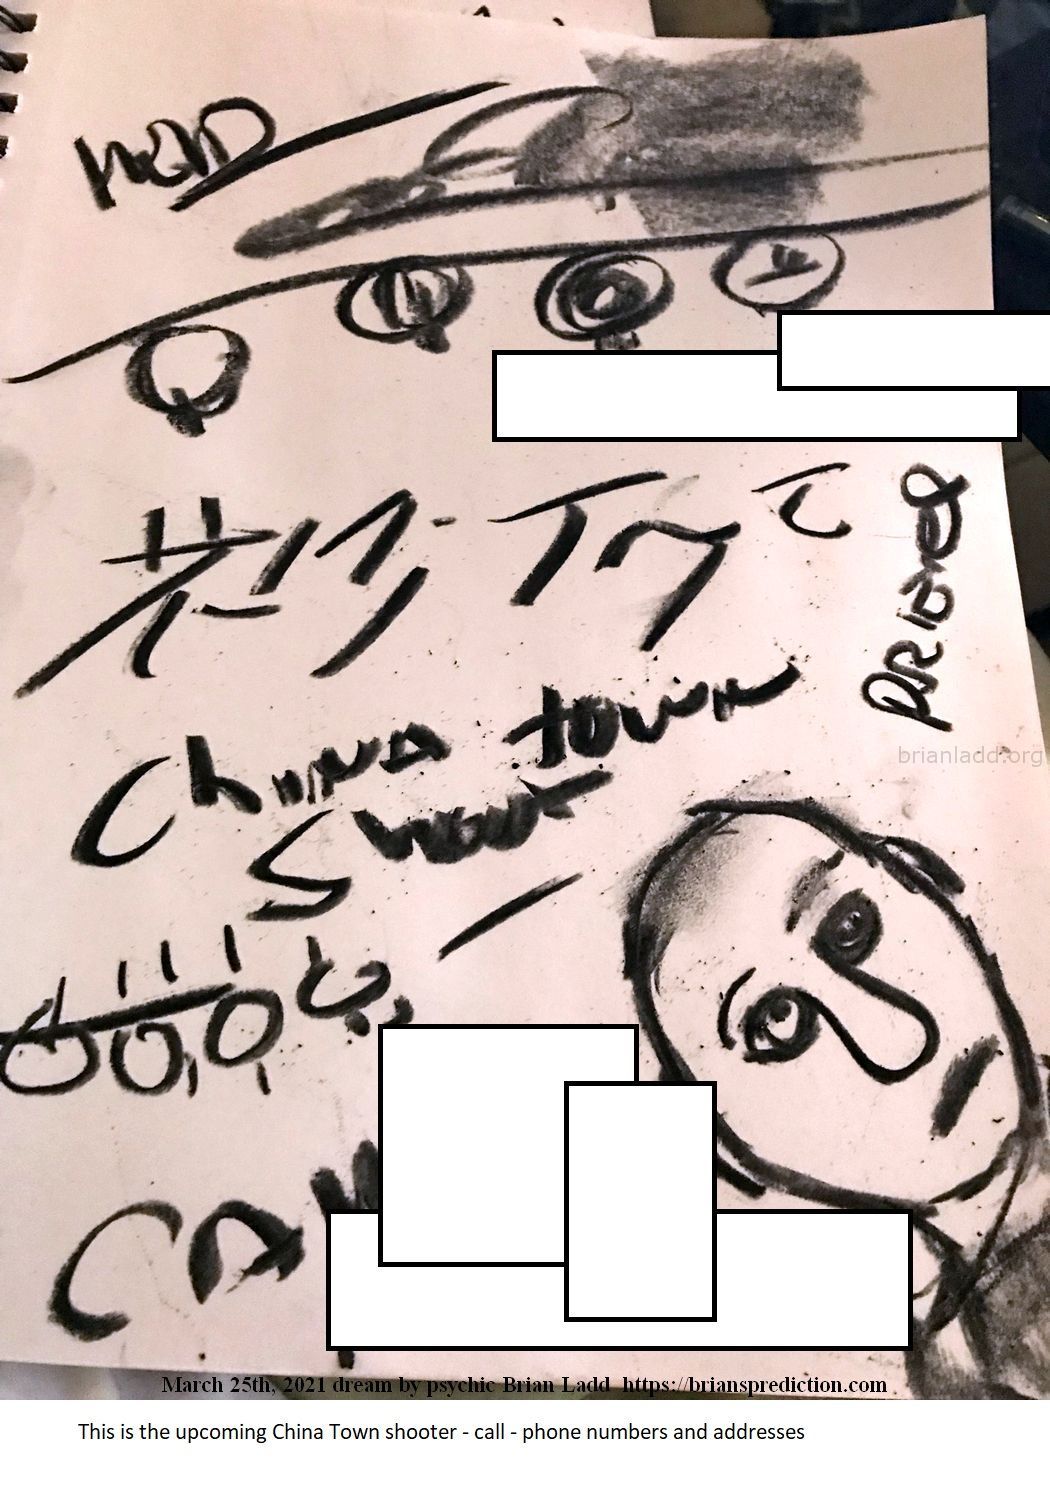 14646 25 March 2021 1 - This Is The Upcoming China Town Shooter - Call - Phone Numbers And Addresses....
This Is The Upcoming China Town Shooter - Call - Phone Numbers And Addresses.
